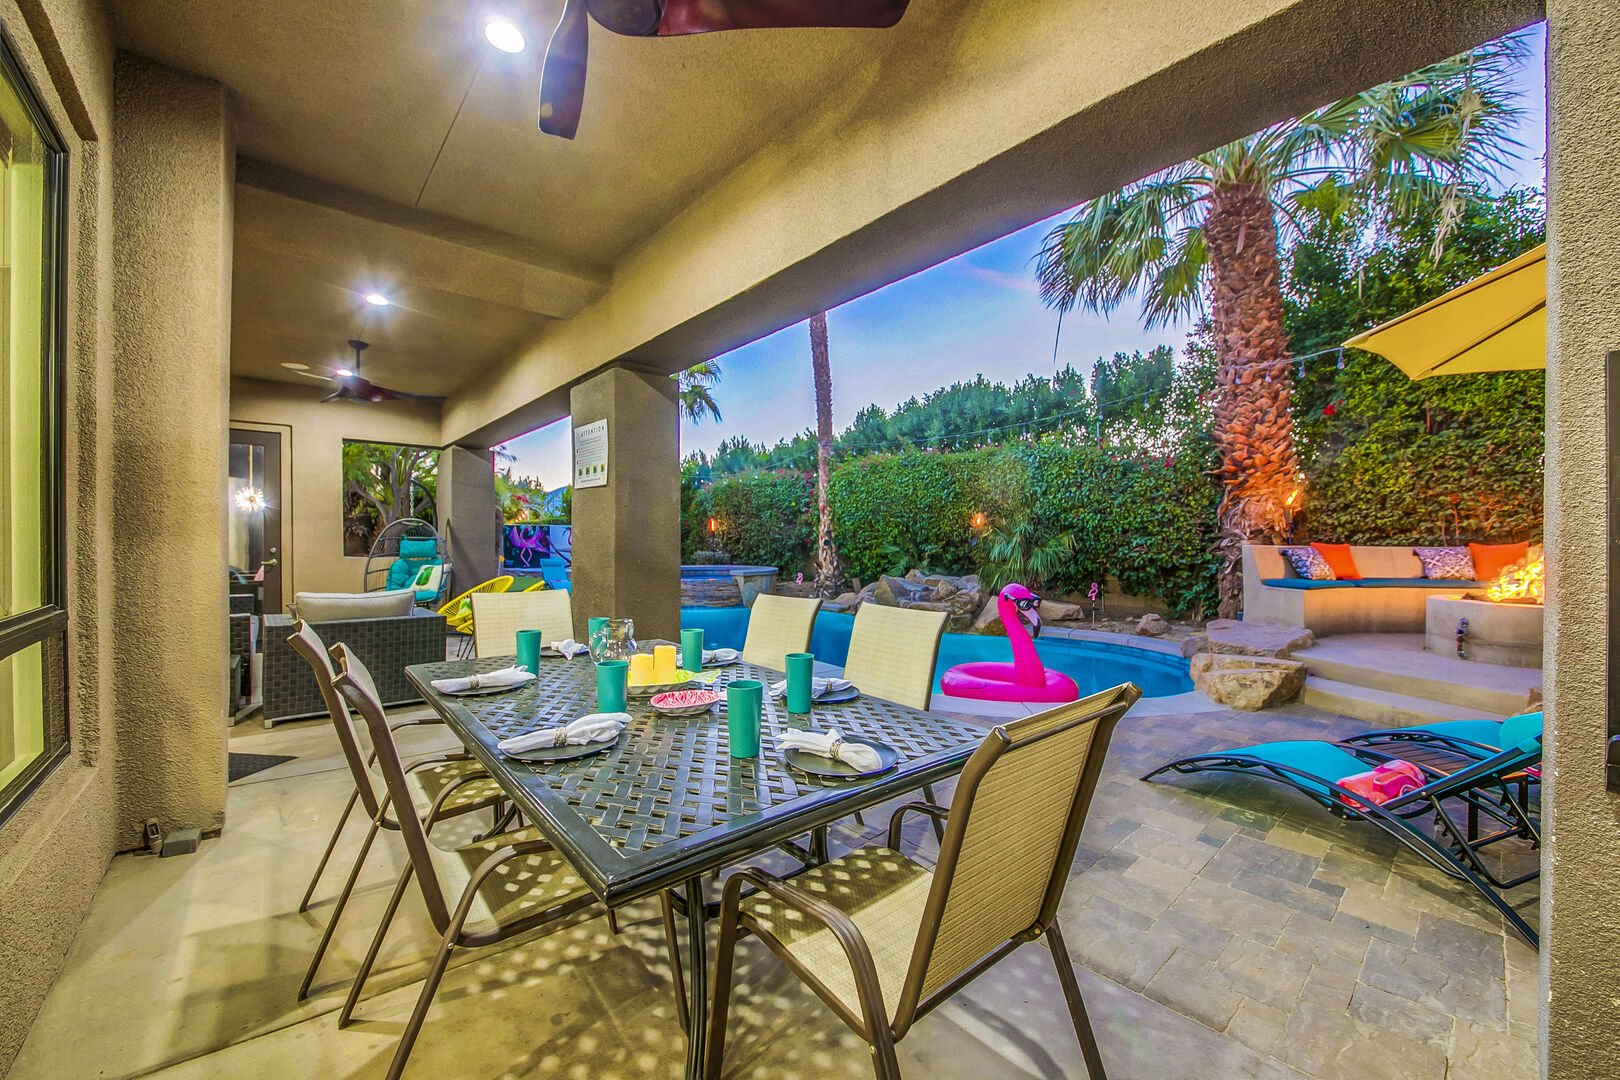 Dine on the outdoor dining table with seating for six. All dinnerware provided.